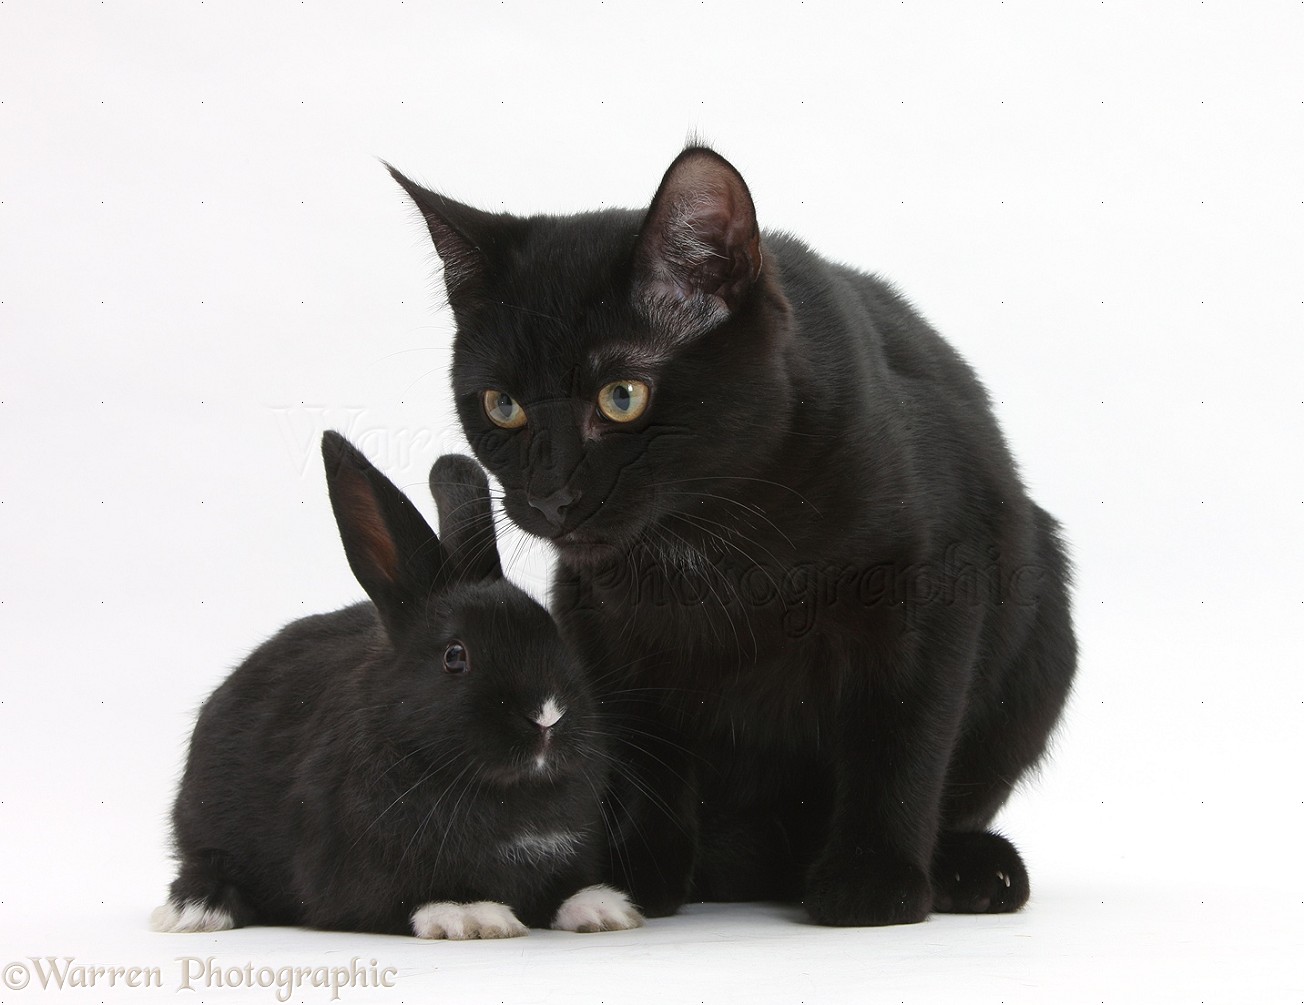 Wp20710 Black Male Cat Joey  6 Months Old With Black Lionhead Cross